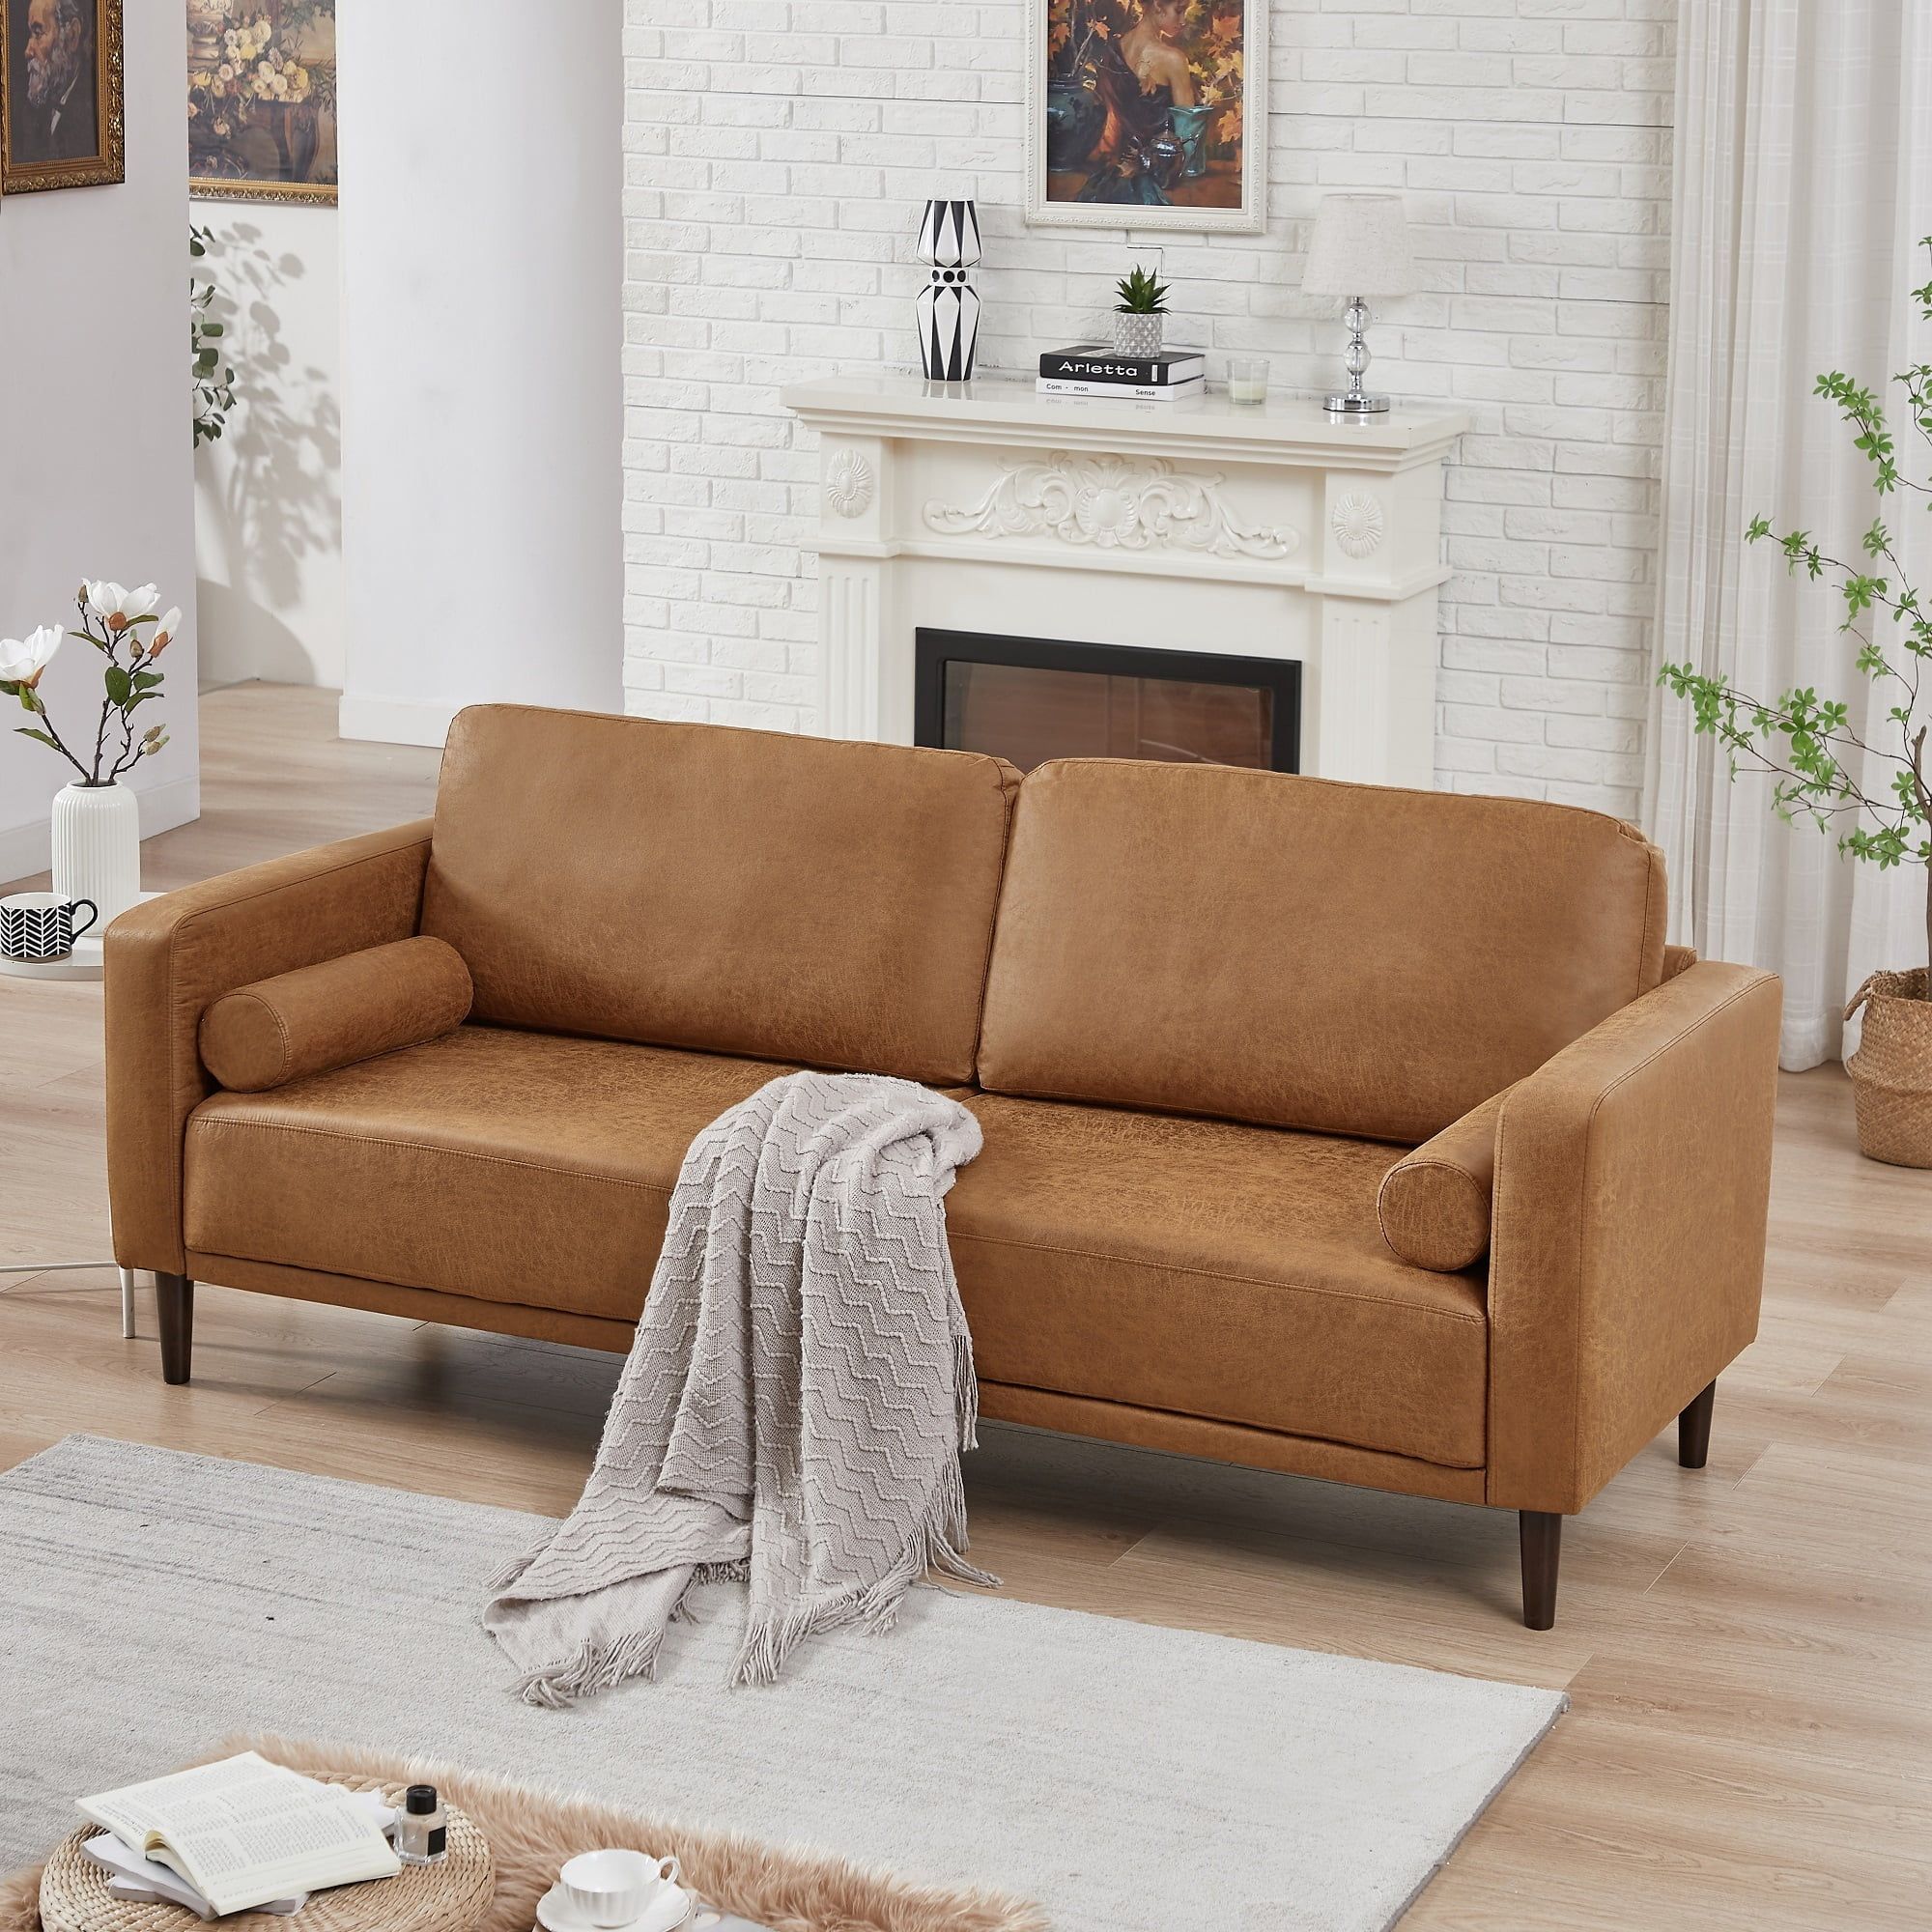 Homfa 3 Seat Sofa, 78.9'' Modern Large Upholstered PU Couch with Square Arm, Camel | Walmart (US)